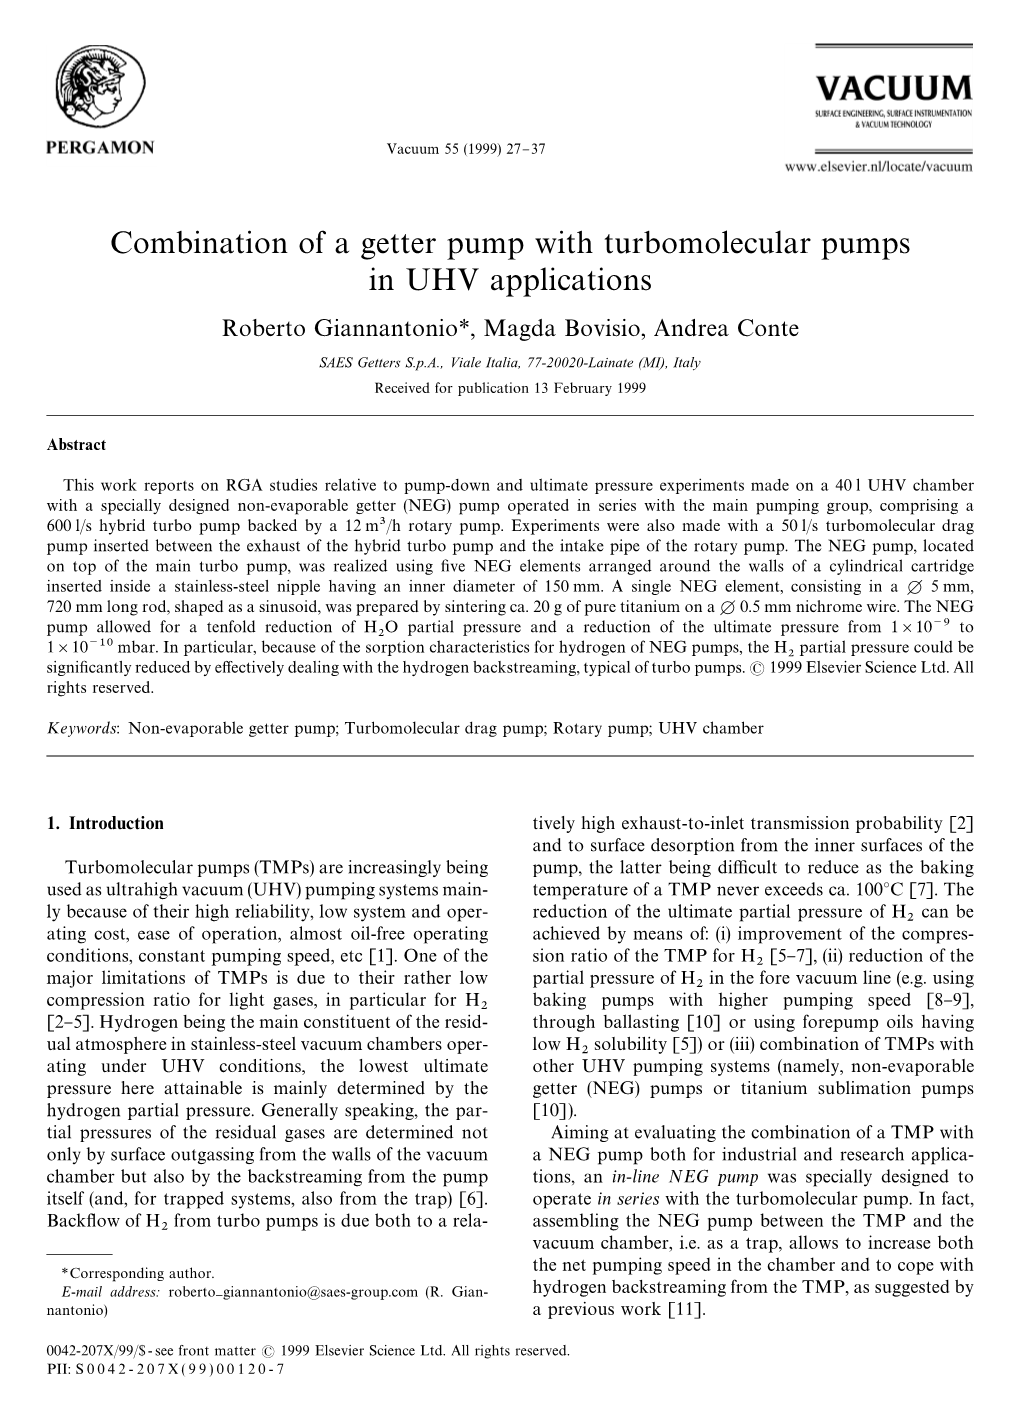 Combination of a Getter Pump with Turbomolecular Pumps in UHV